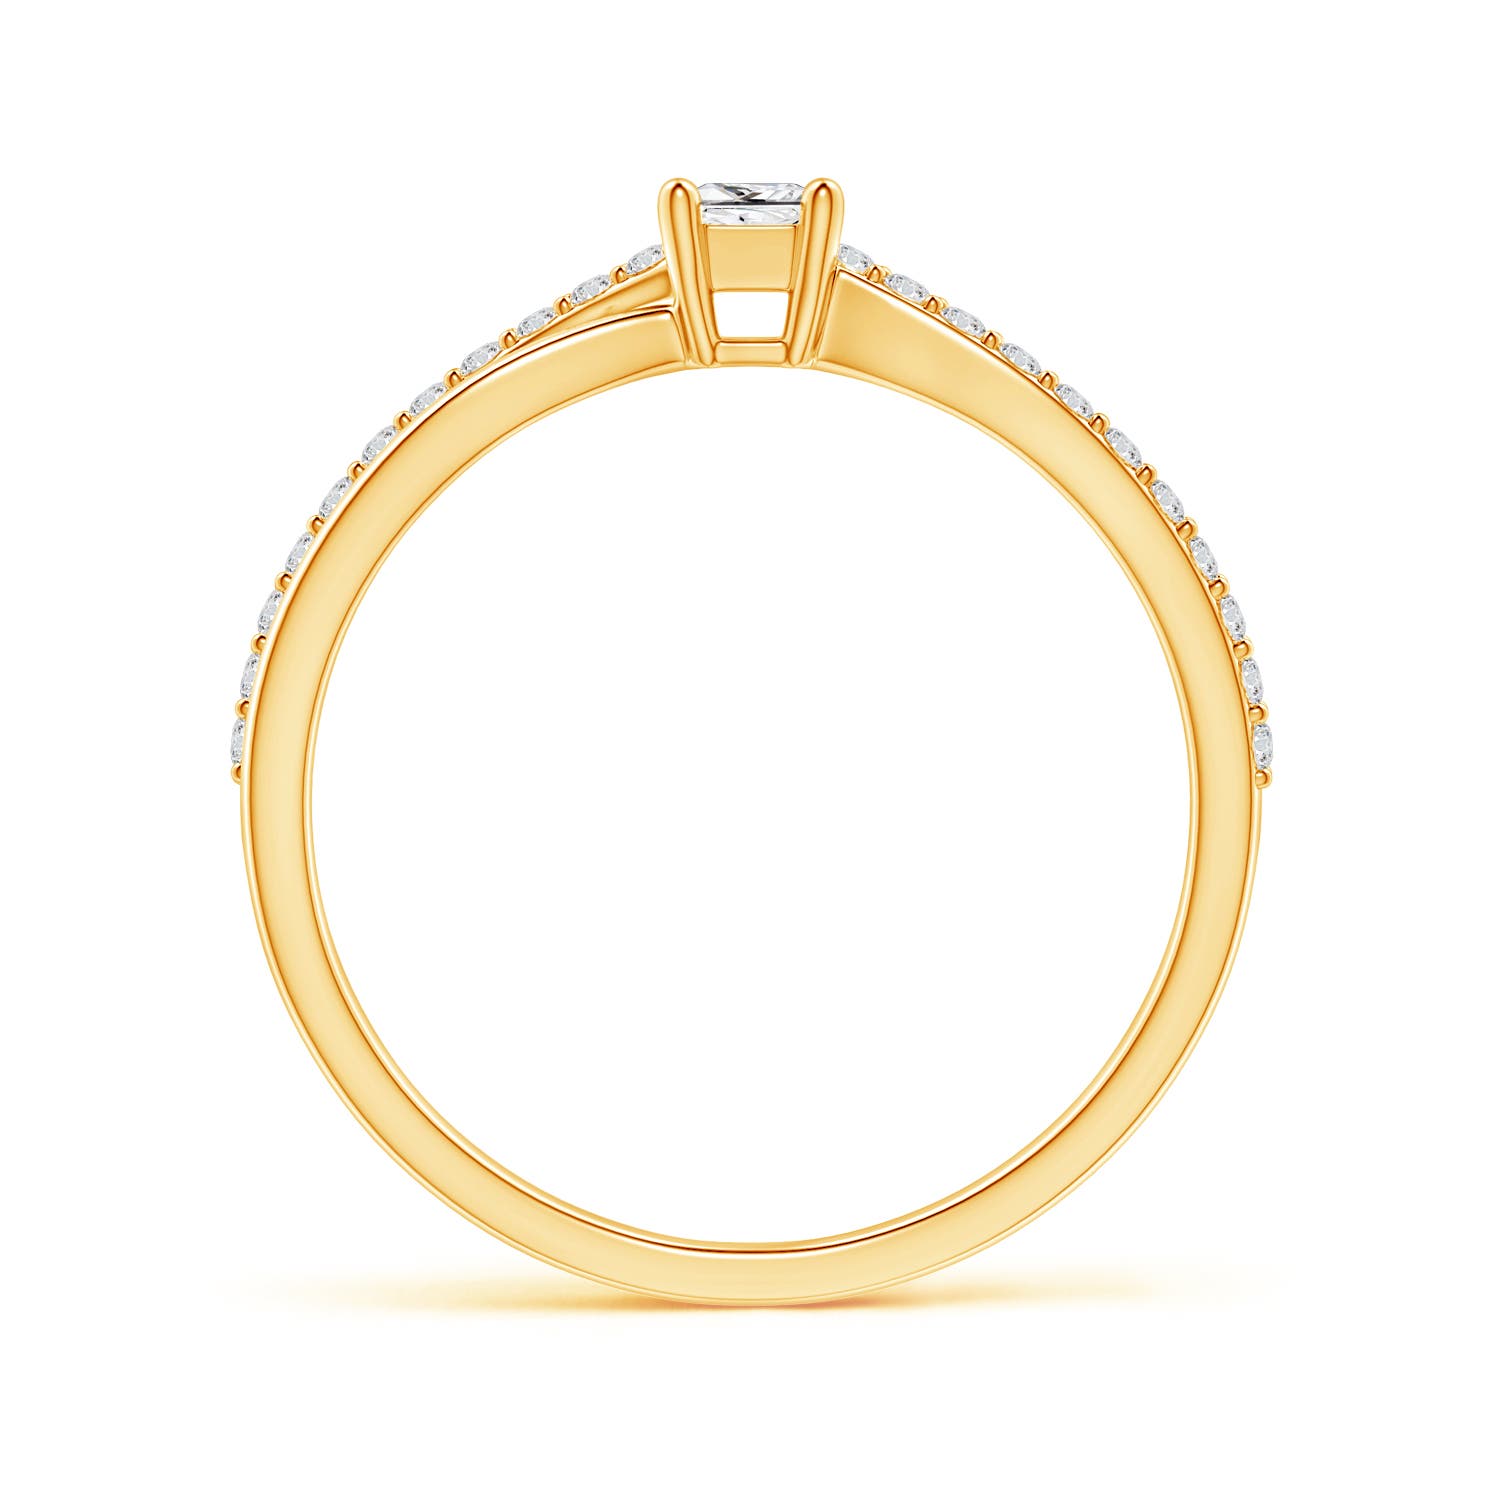 H, SI2 / 0.32 CT / 14 KT Yellow Gold